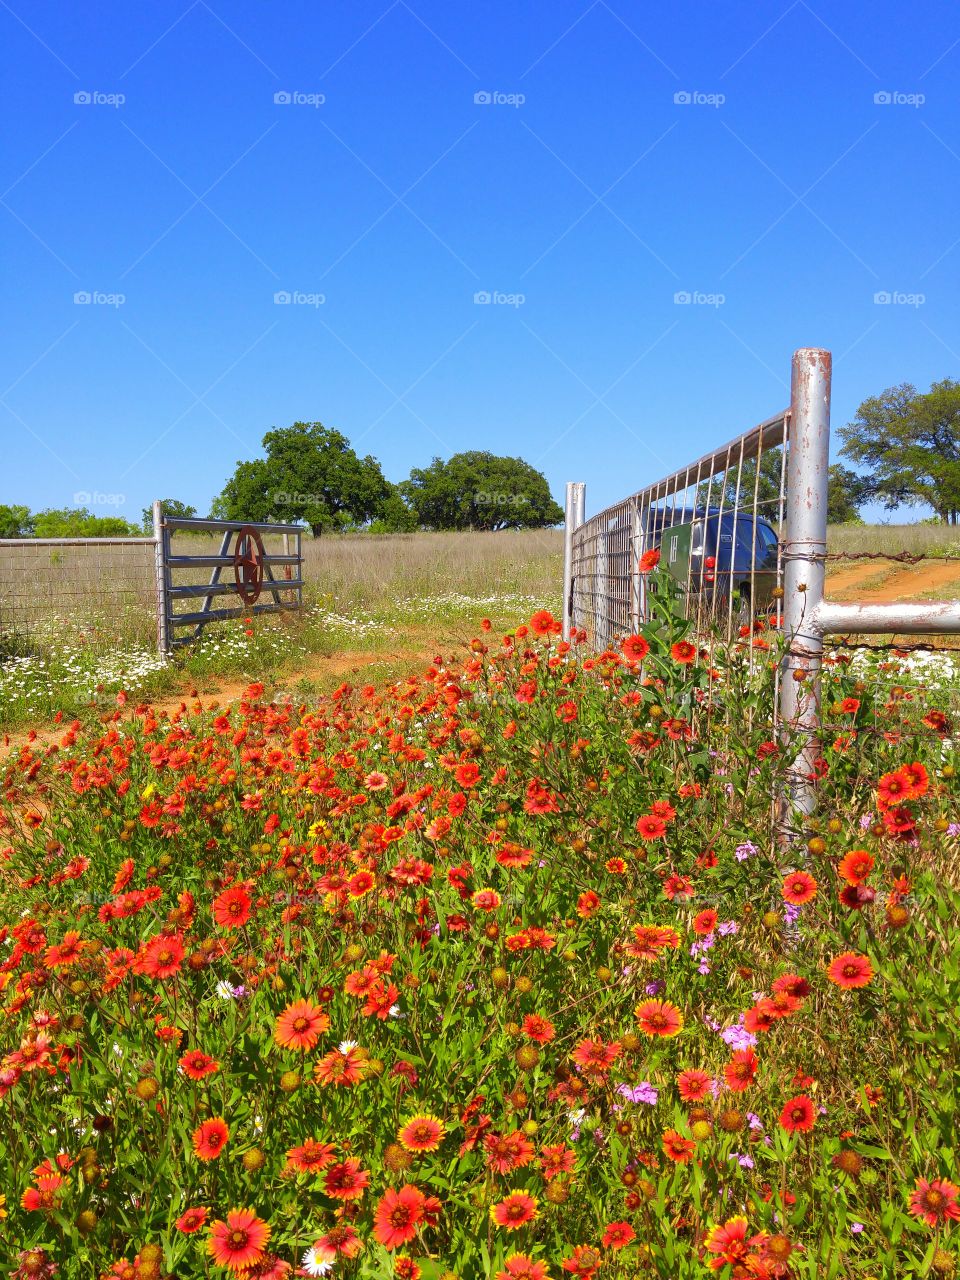 wildflowers at the gate